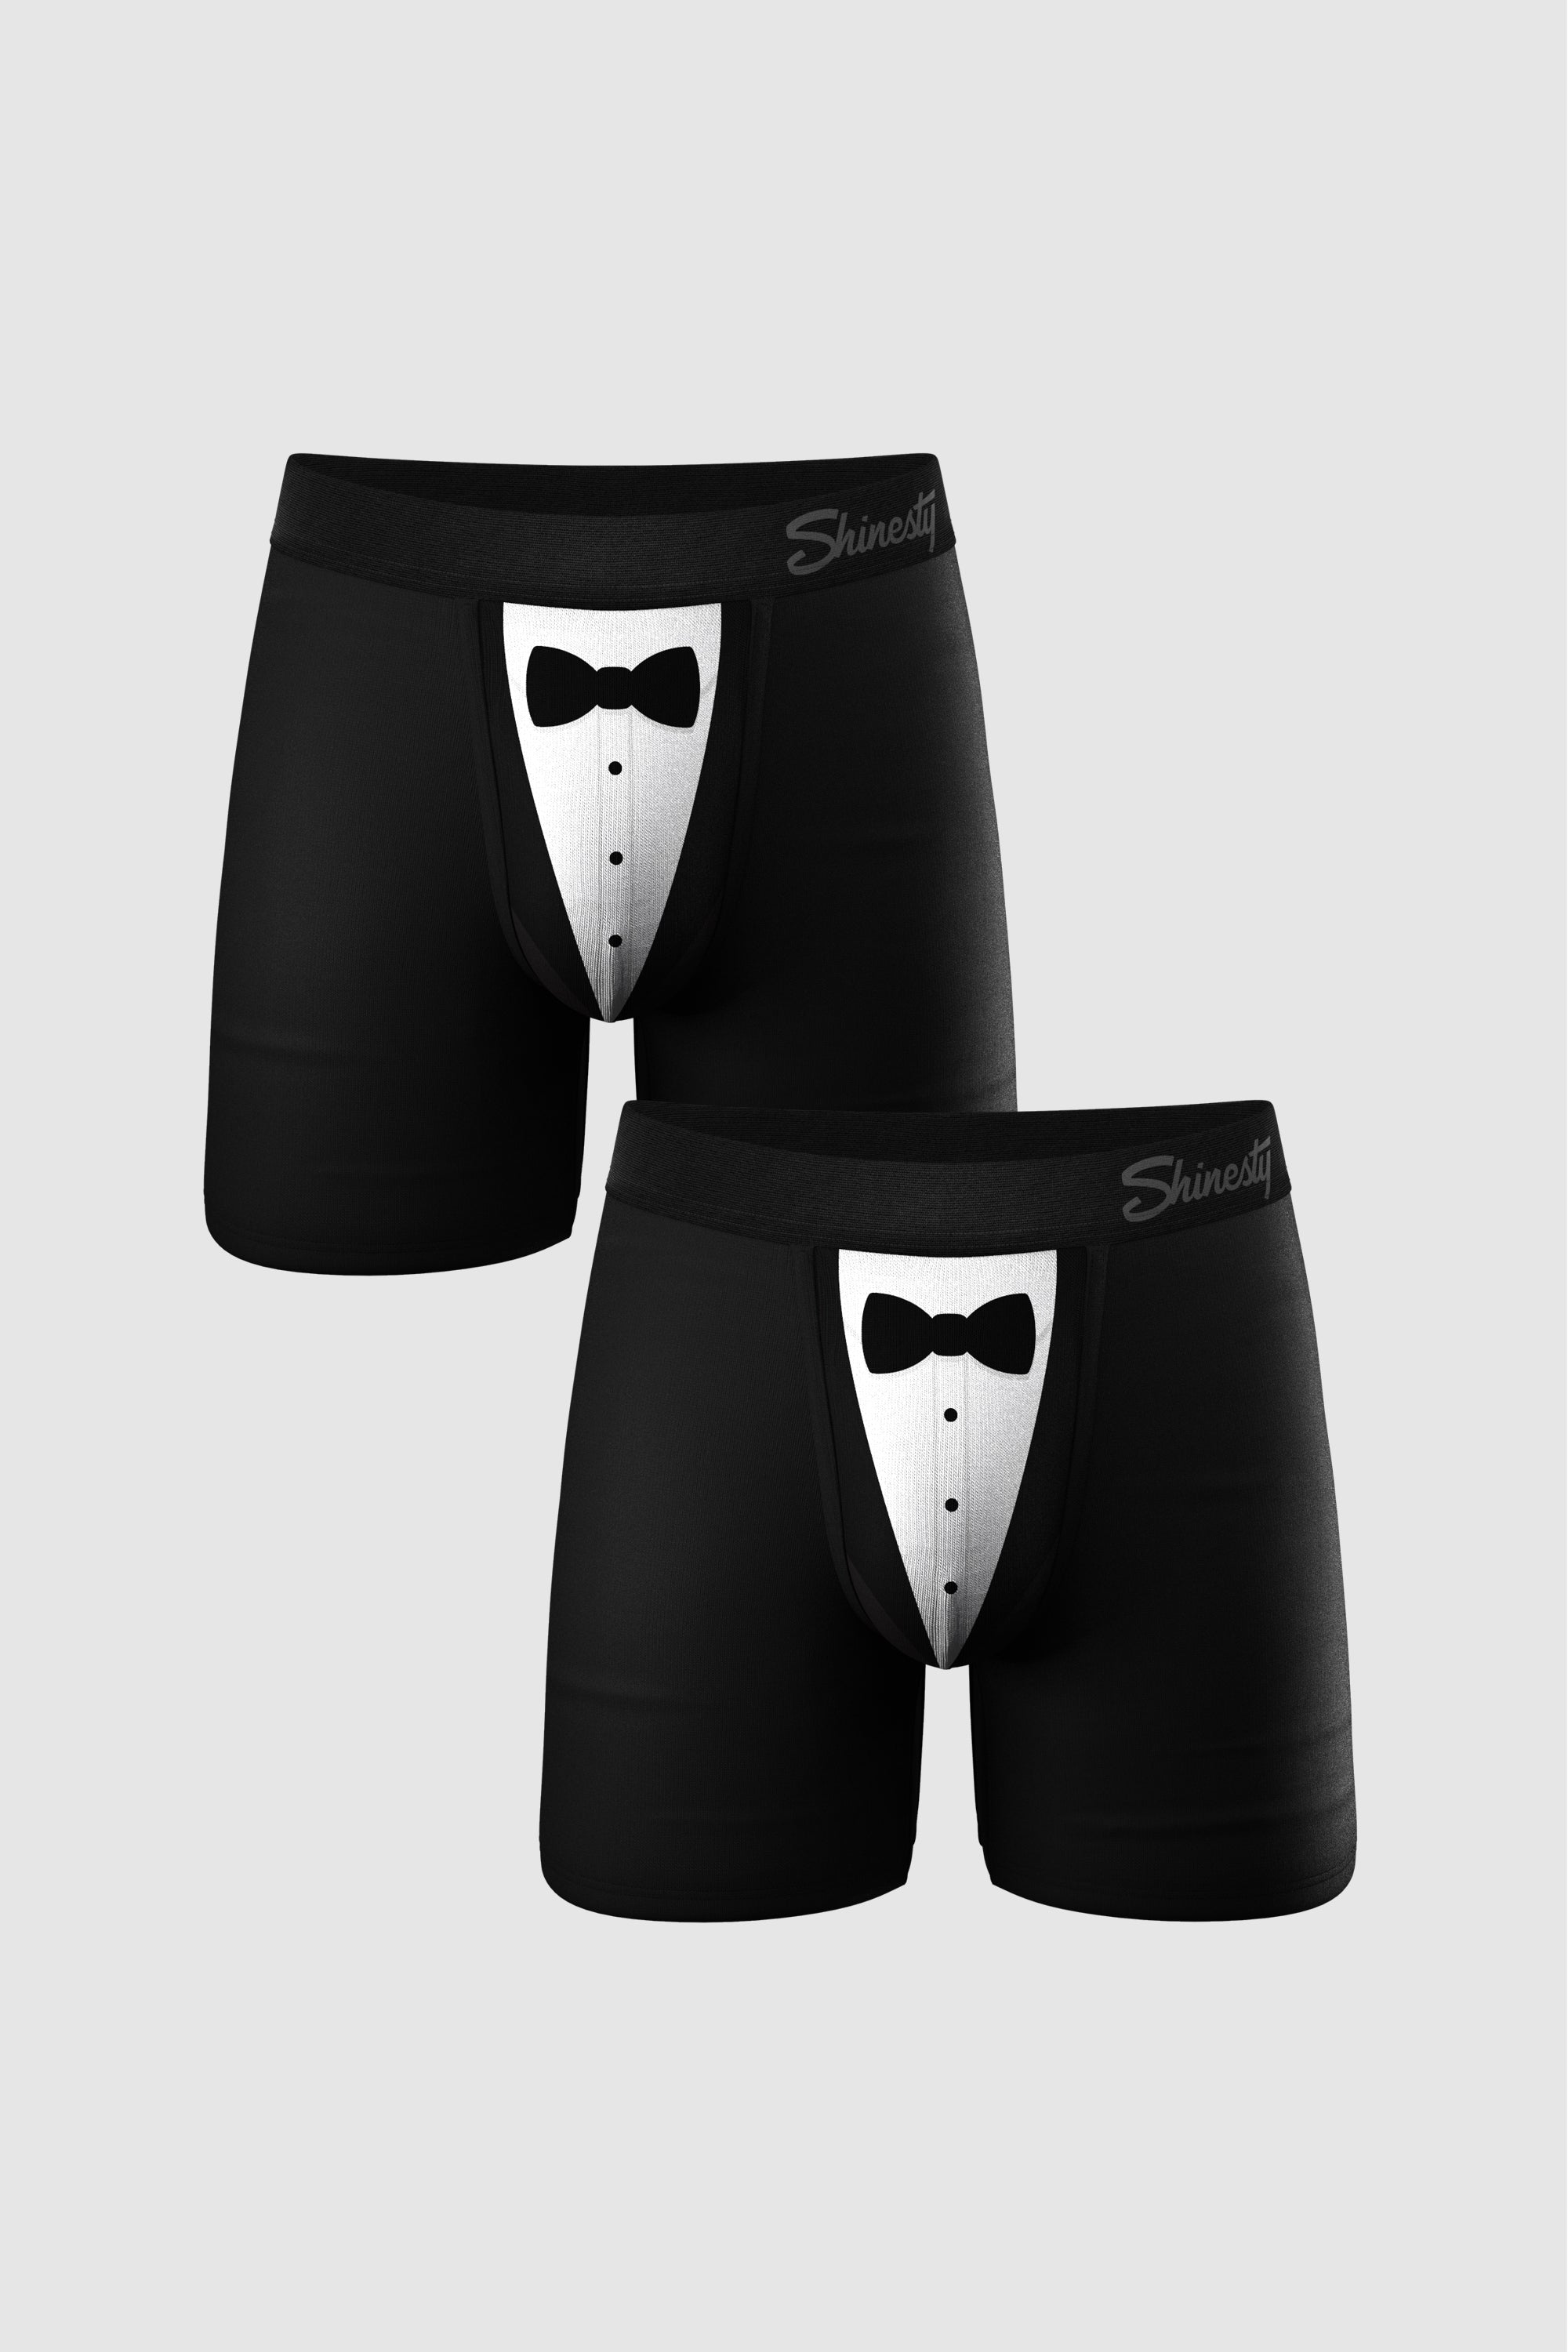 2 Pack Couple Couples Boxer Black Boxer Briefs Breathable, Soft, And  Luxurious Exotic Apparel For Men And Women From Zhoujielu, $16.63